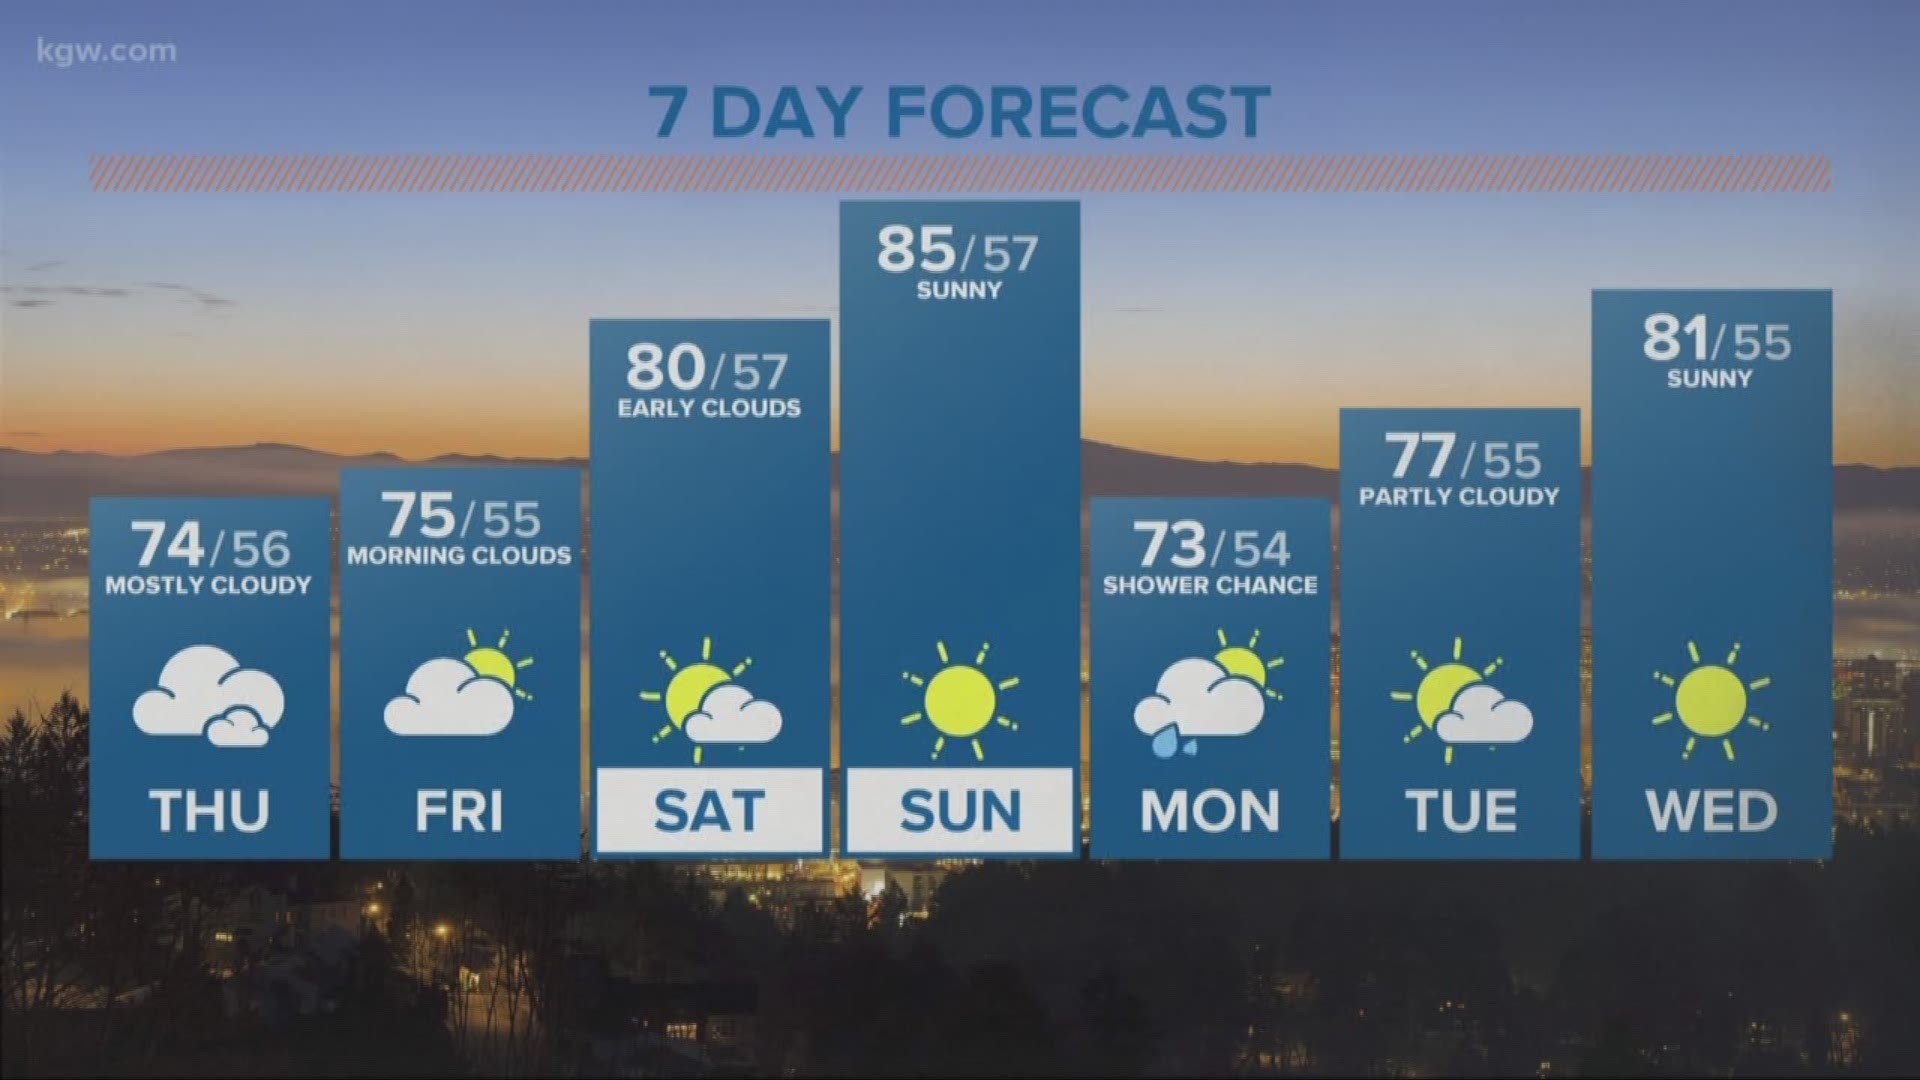 KGW Noon forecast 6-21-18